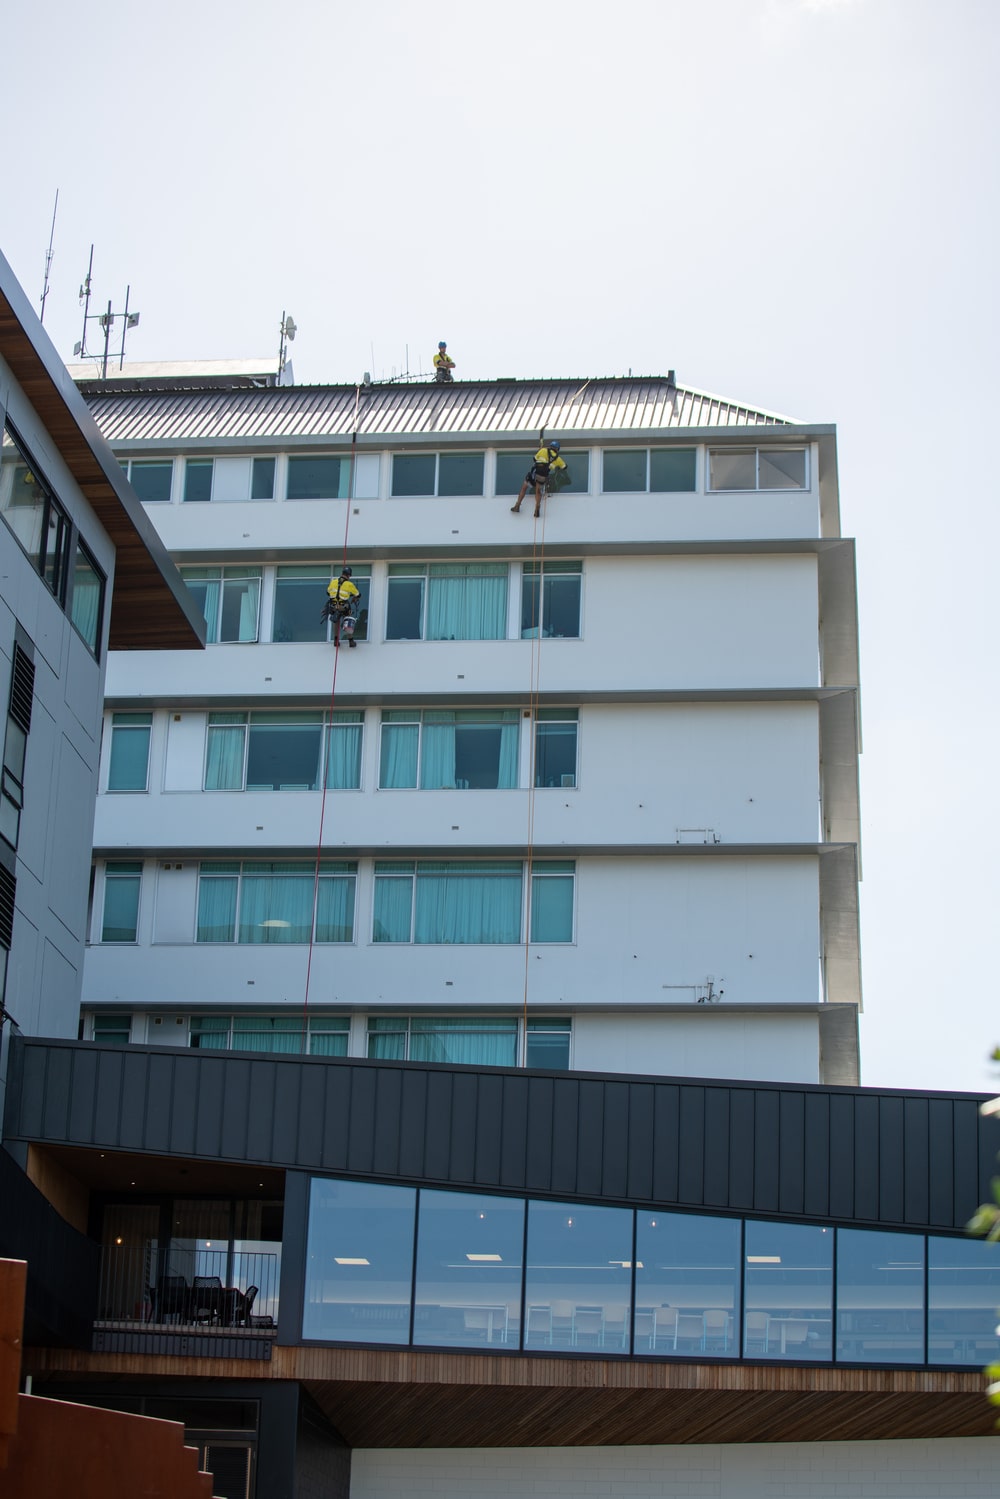 Industrial abseilers cleaning apartment building windows